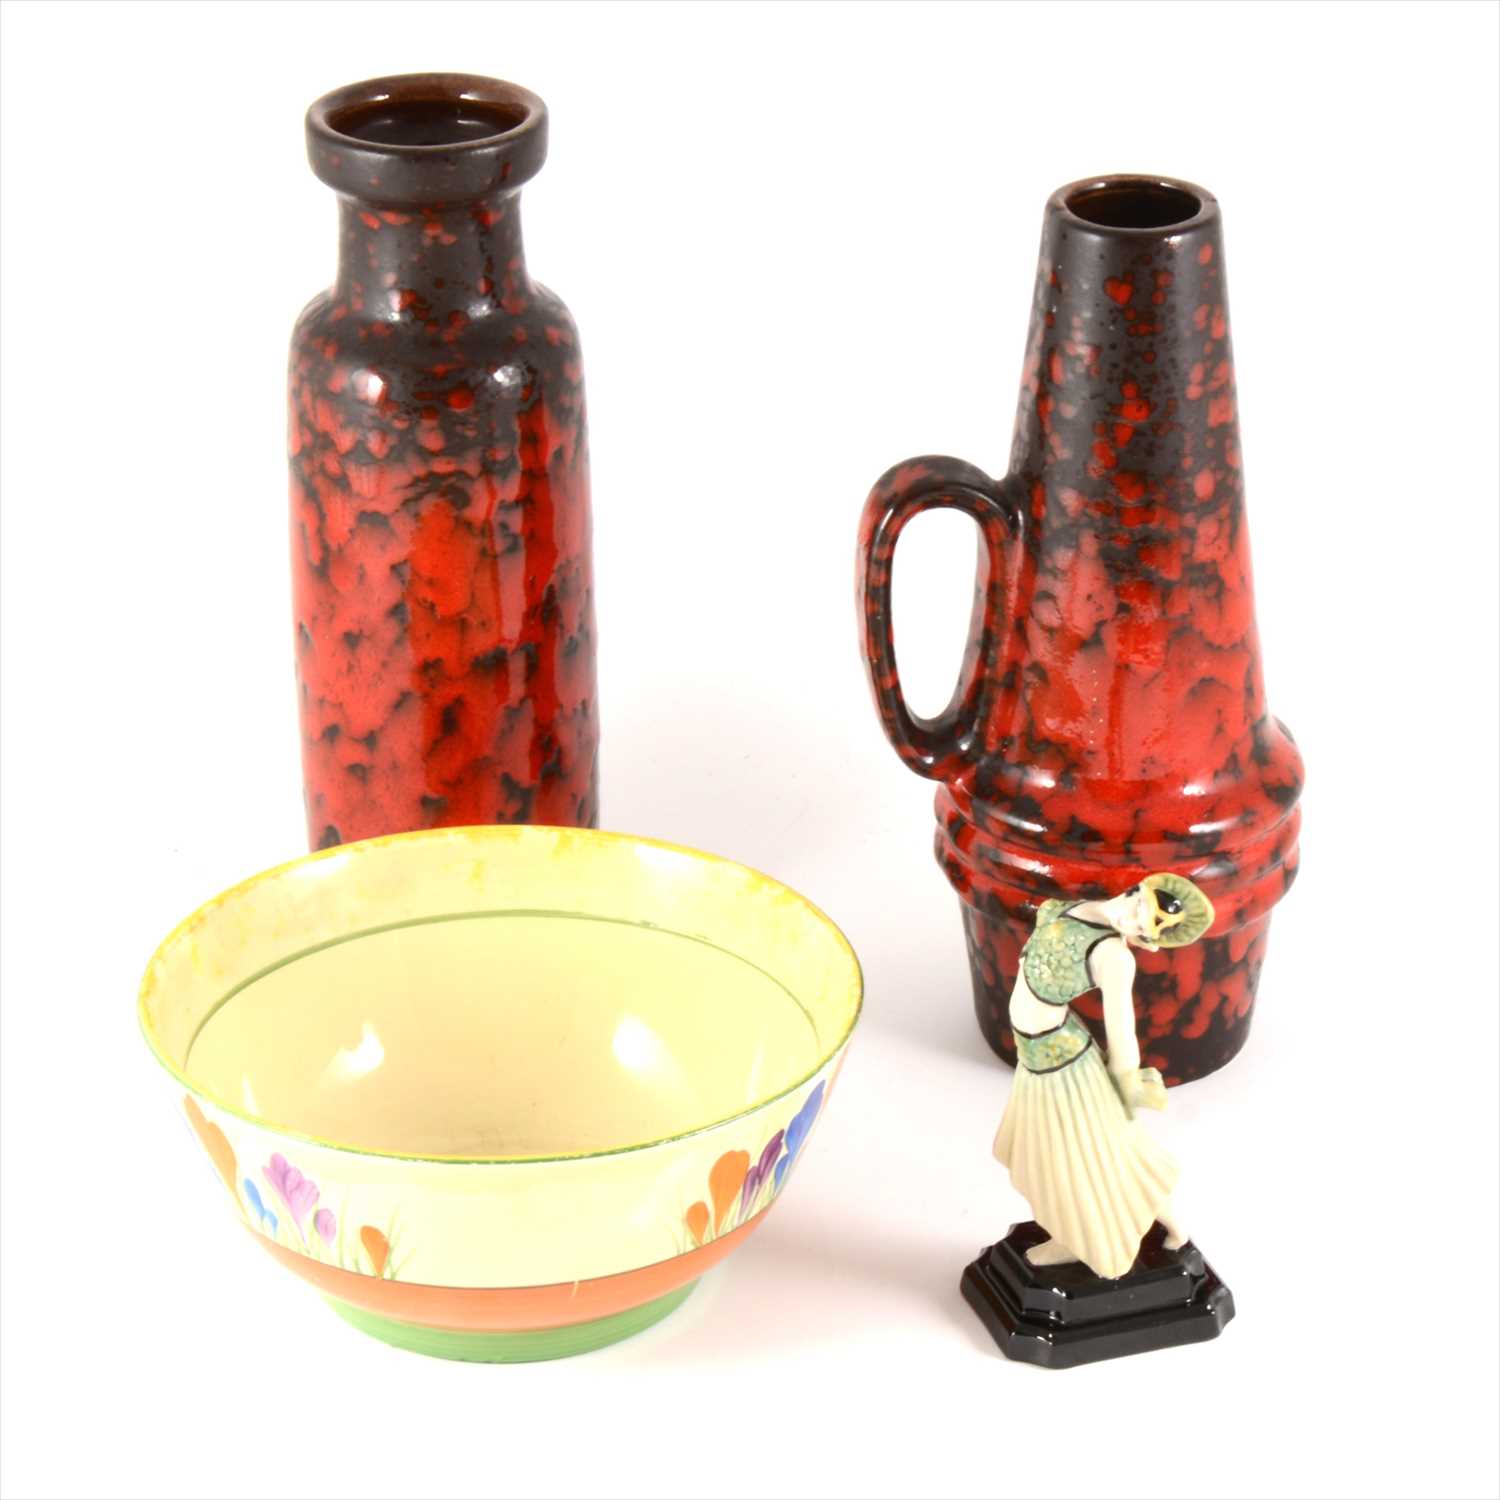 Lot 37 - A Clarice Cliff Crocus bowl, Peggy Davies Guild Issue figurine "Jade" 2001,  a German red glaze vase and jug, 23cm.